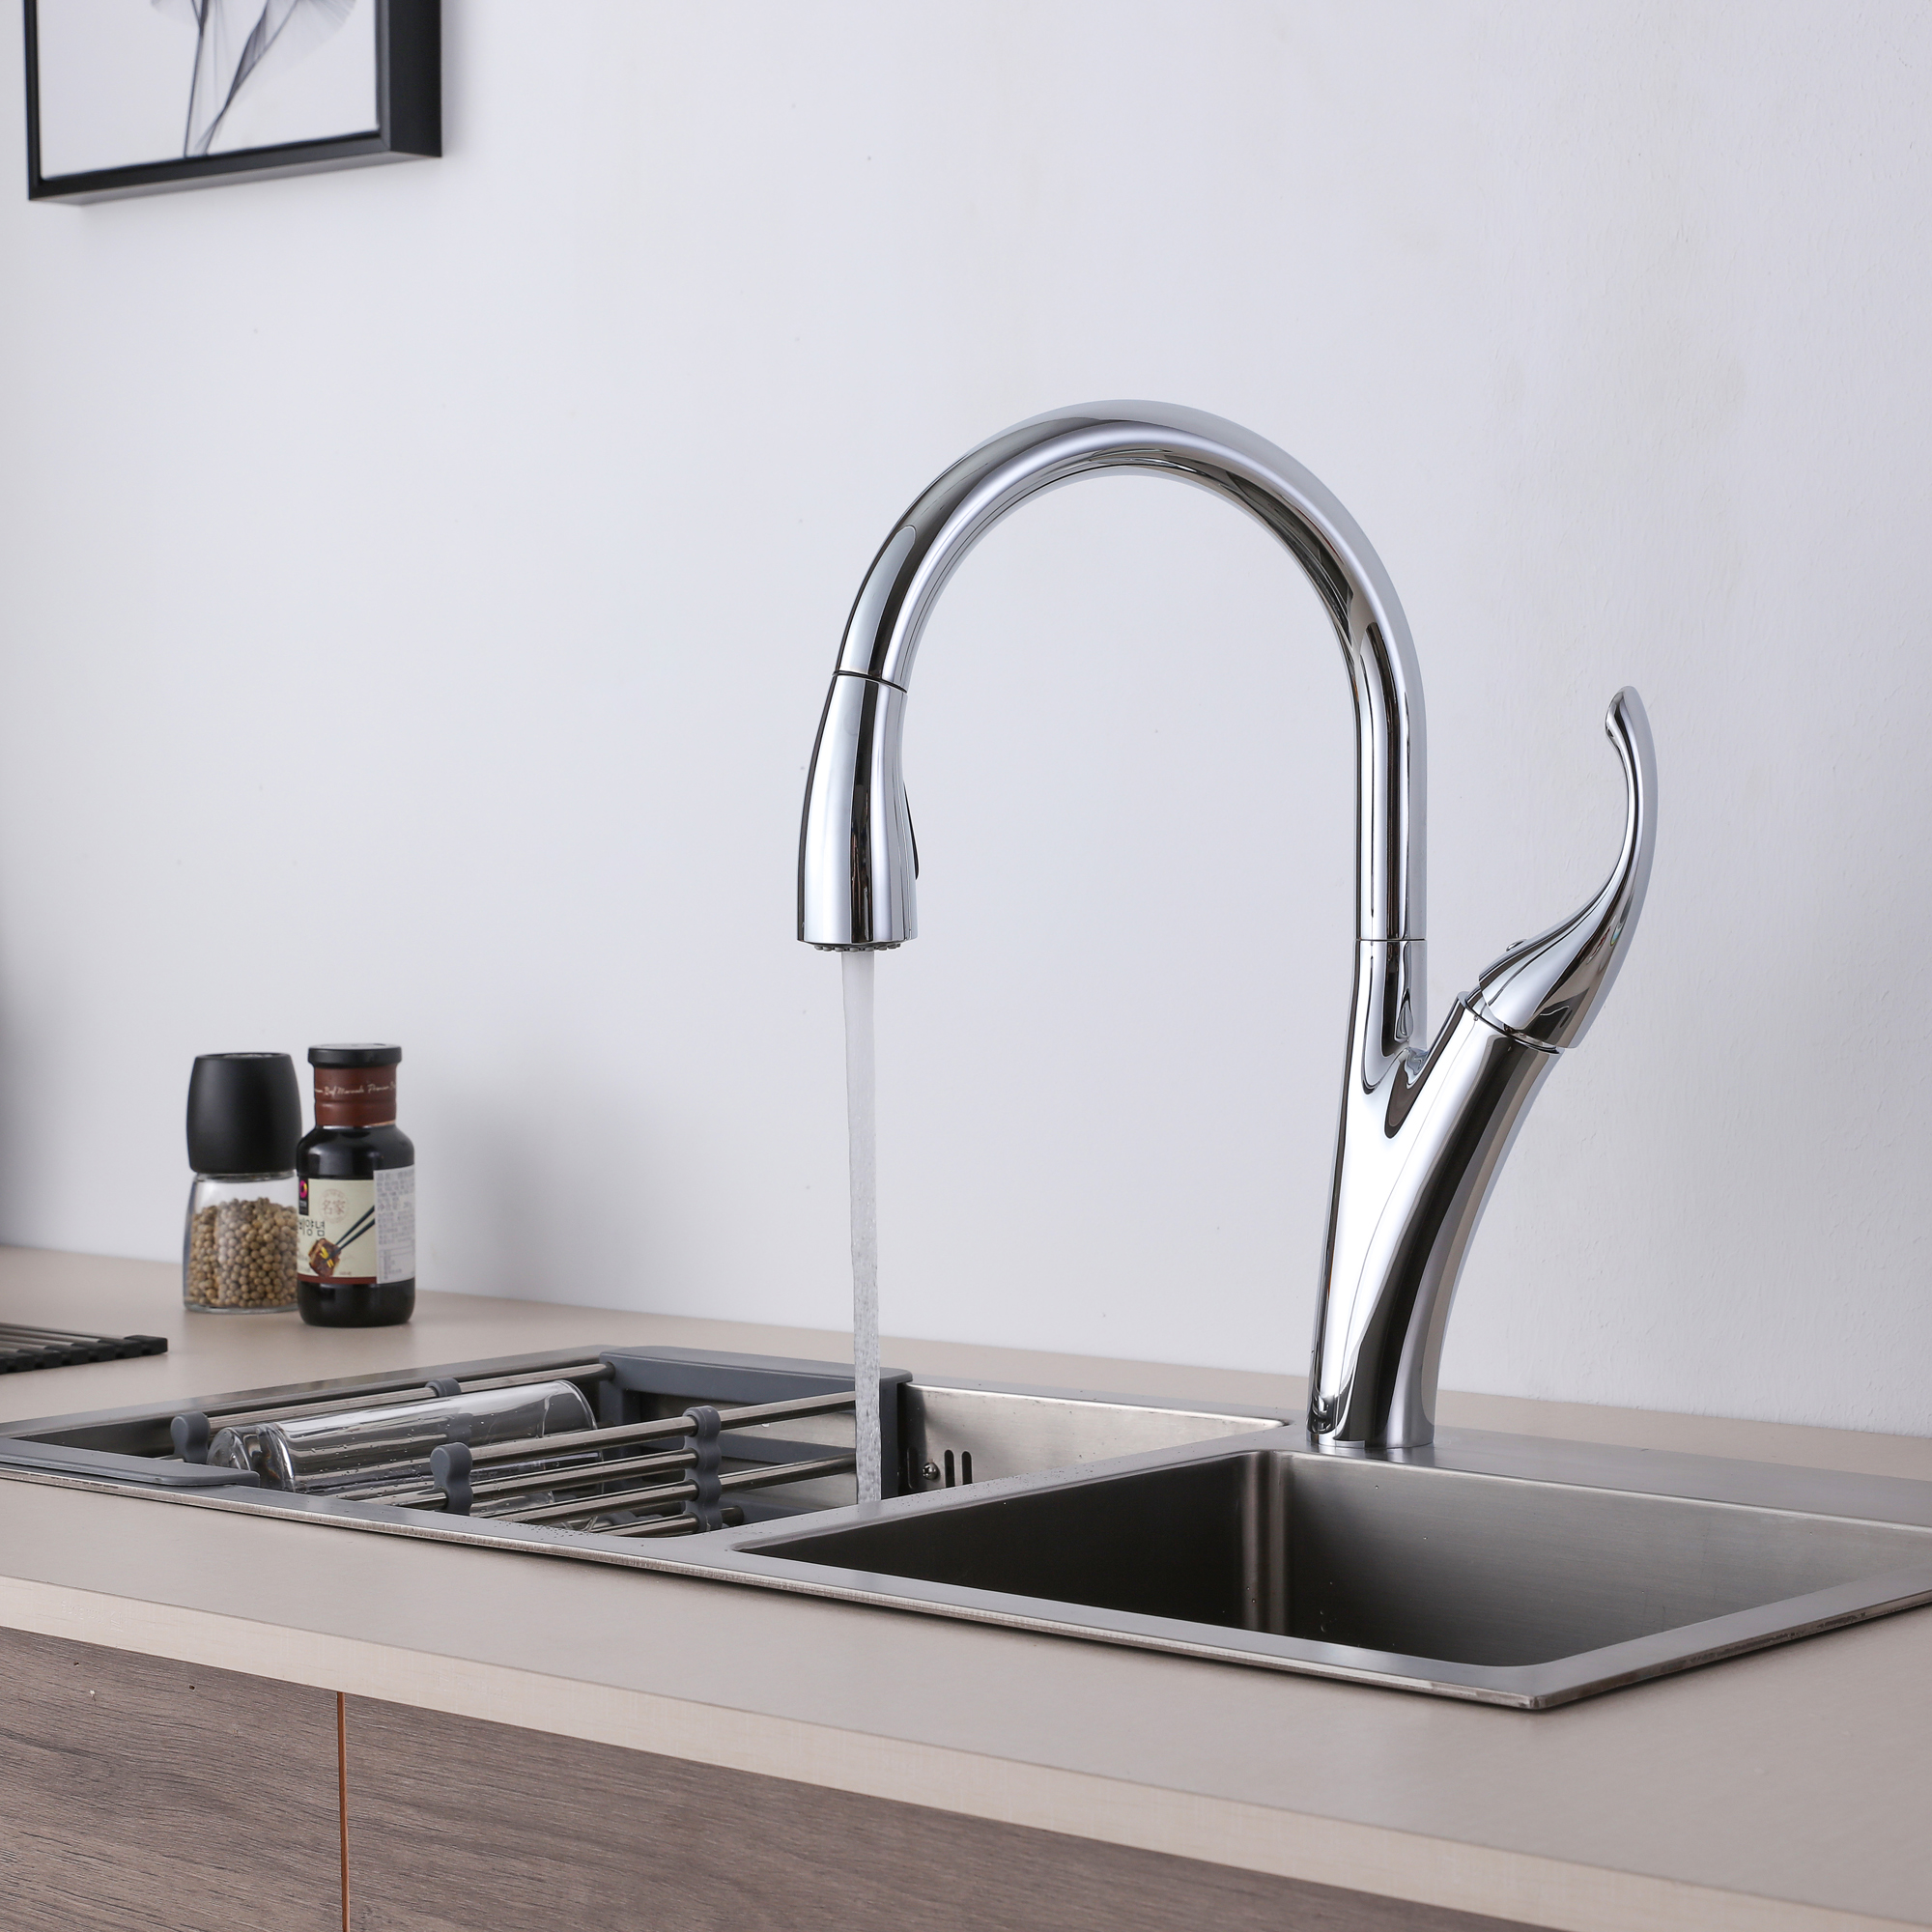 Practical Zinc Faucet Body Brass inside Chrome Surface Kitchen Faucet with Spray